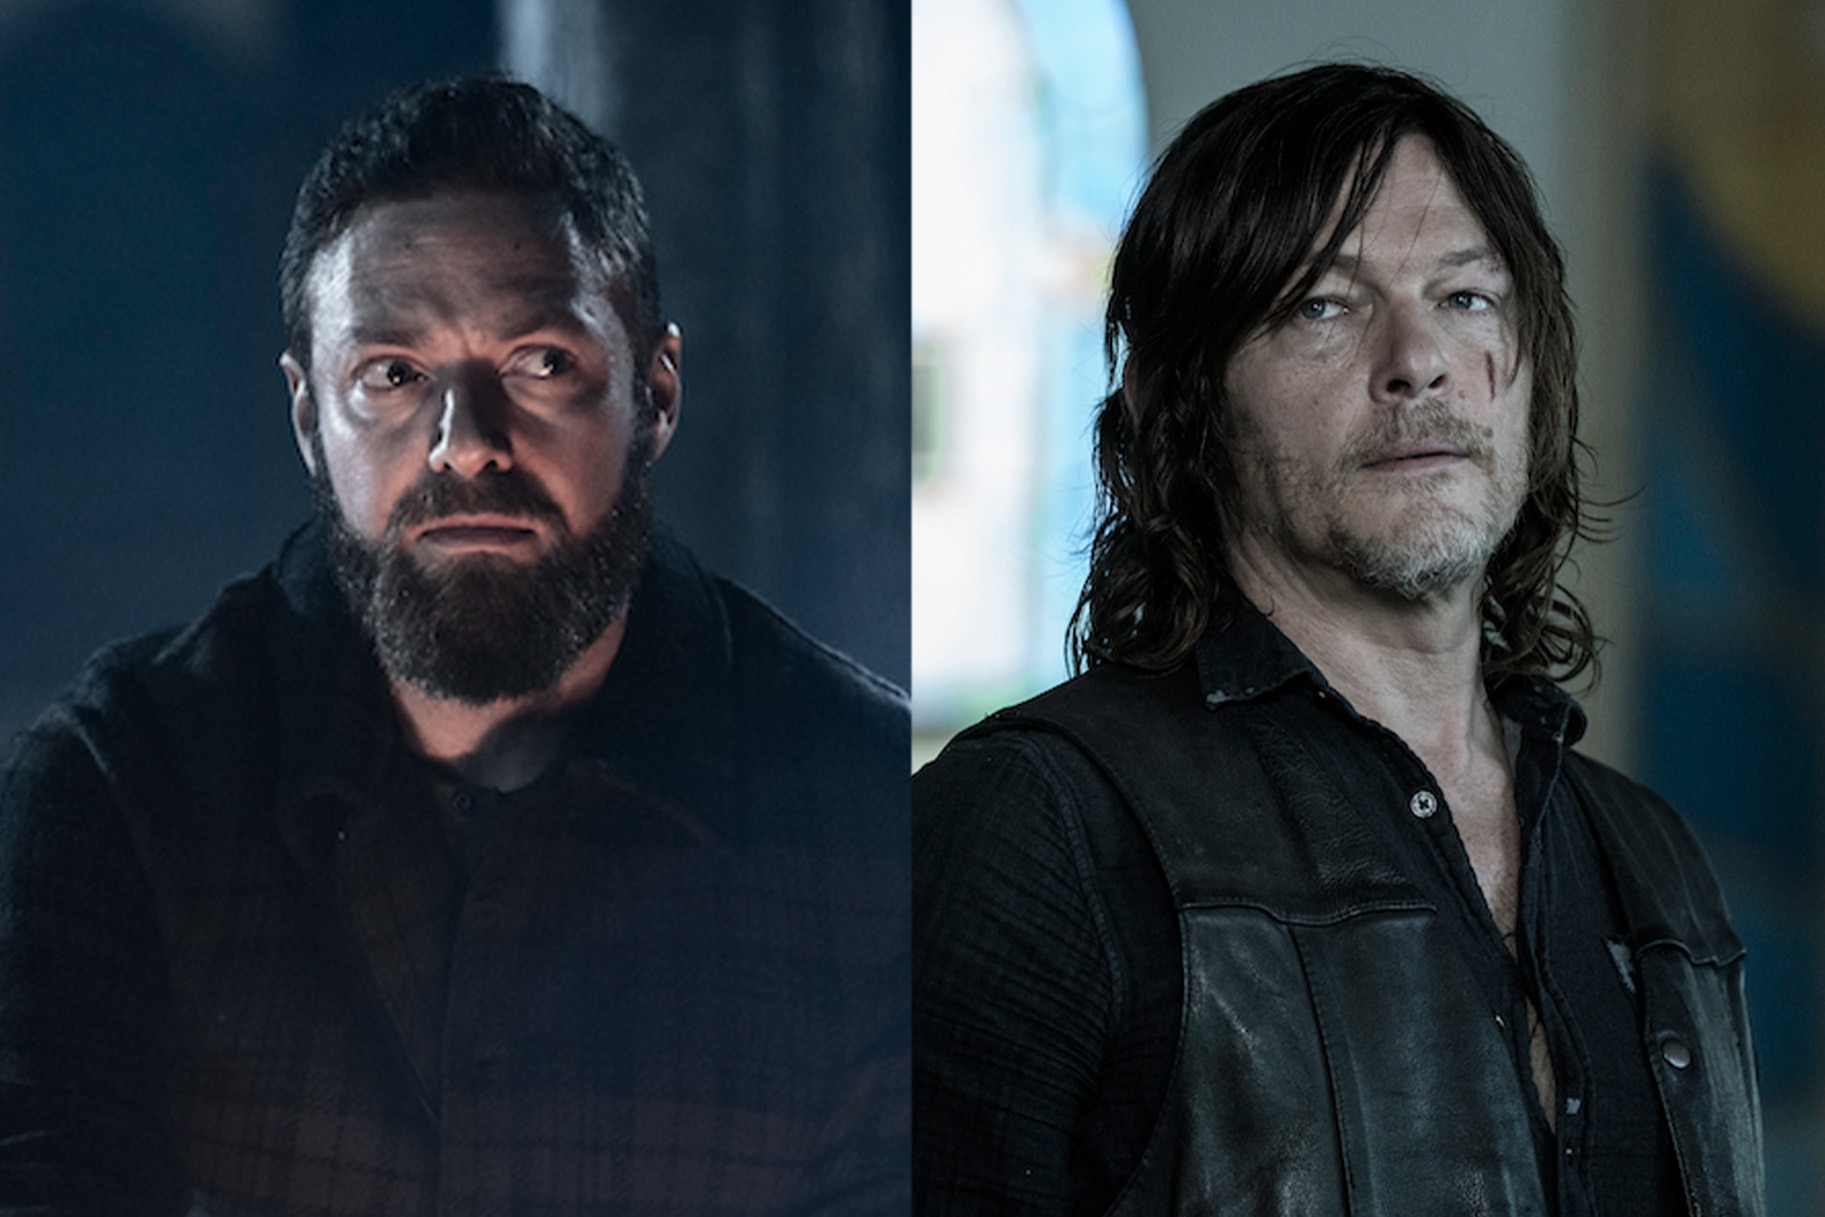 (L-R) - Ross Marquand as Aaron and Norman Reedus as Daryl Dixon in The Walking Dead Season 11, Episode 19